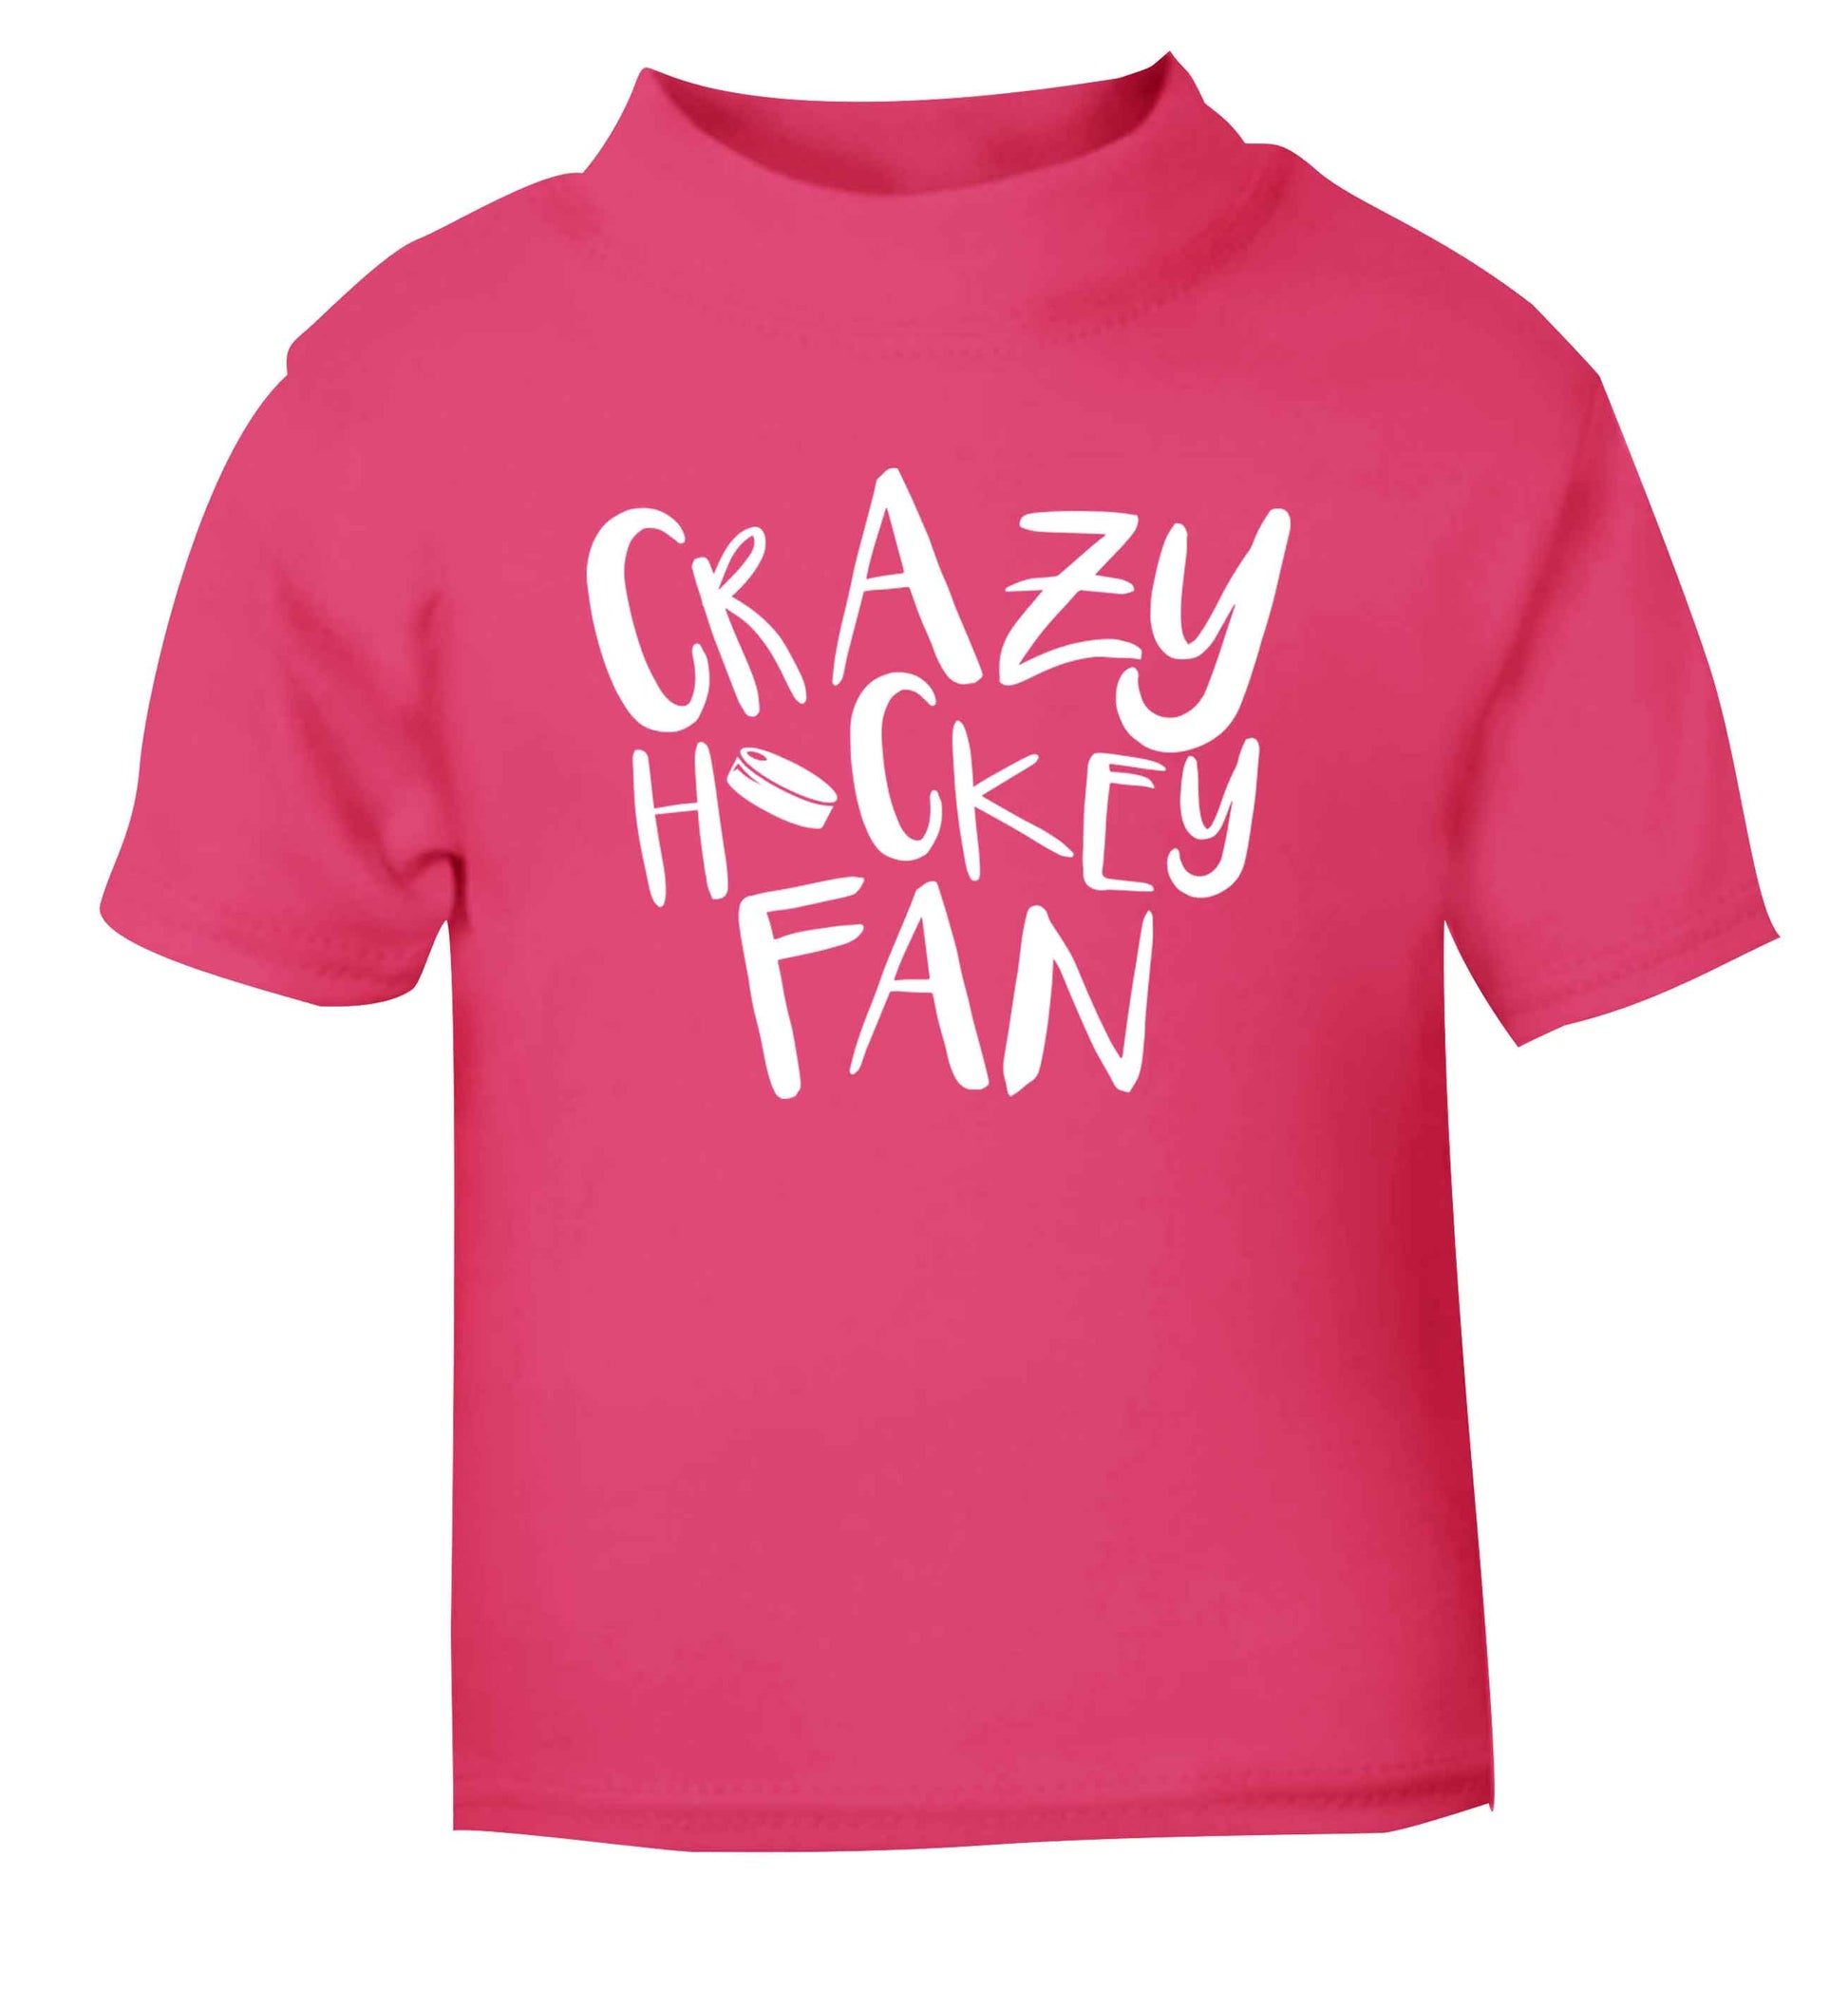 Crazy hockey fan pink Baby Toddler Tshirt 2 Years